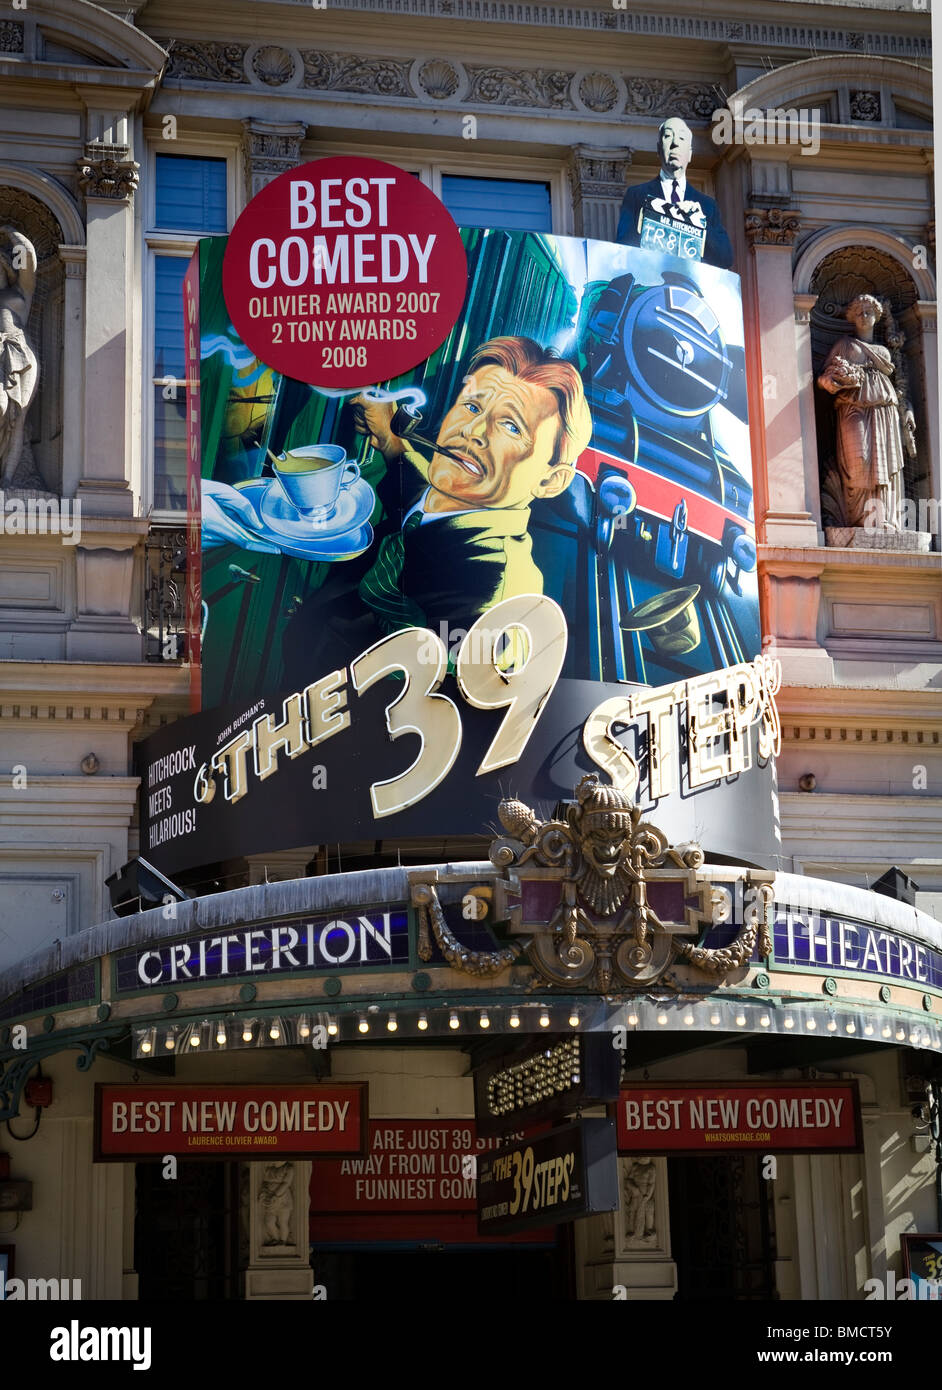 Il 39 Steps Criterion Theatre Piccadilly Circus Foto Stock